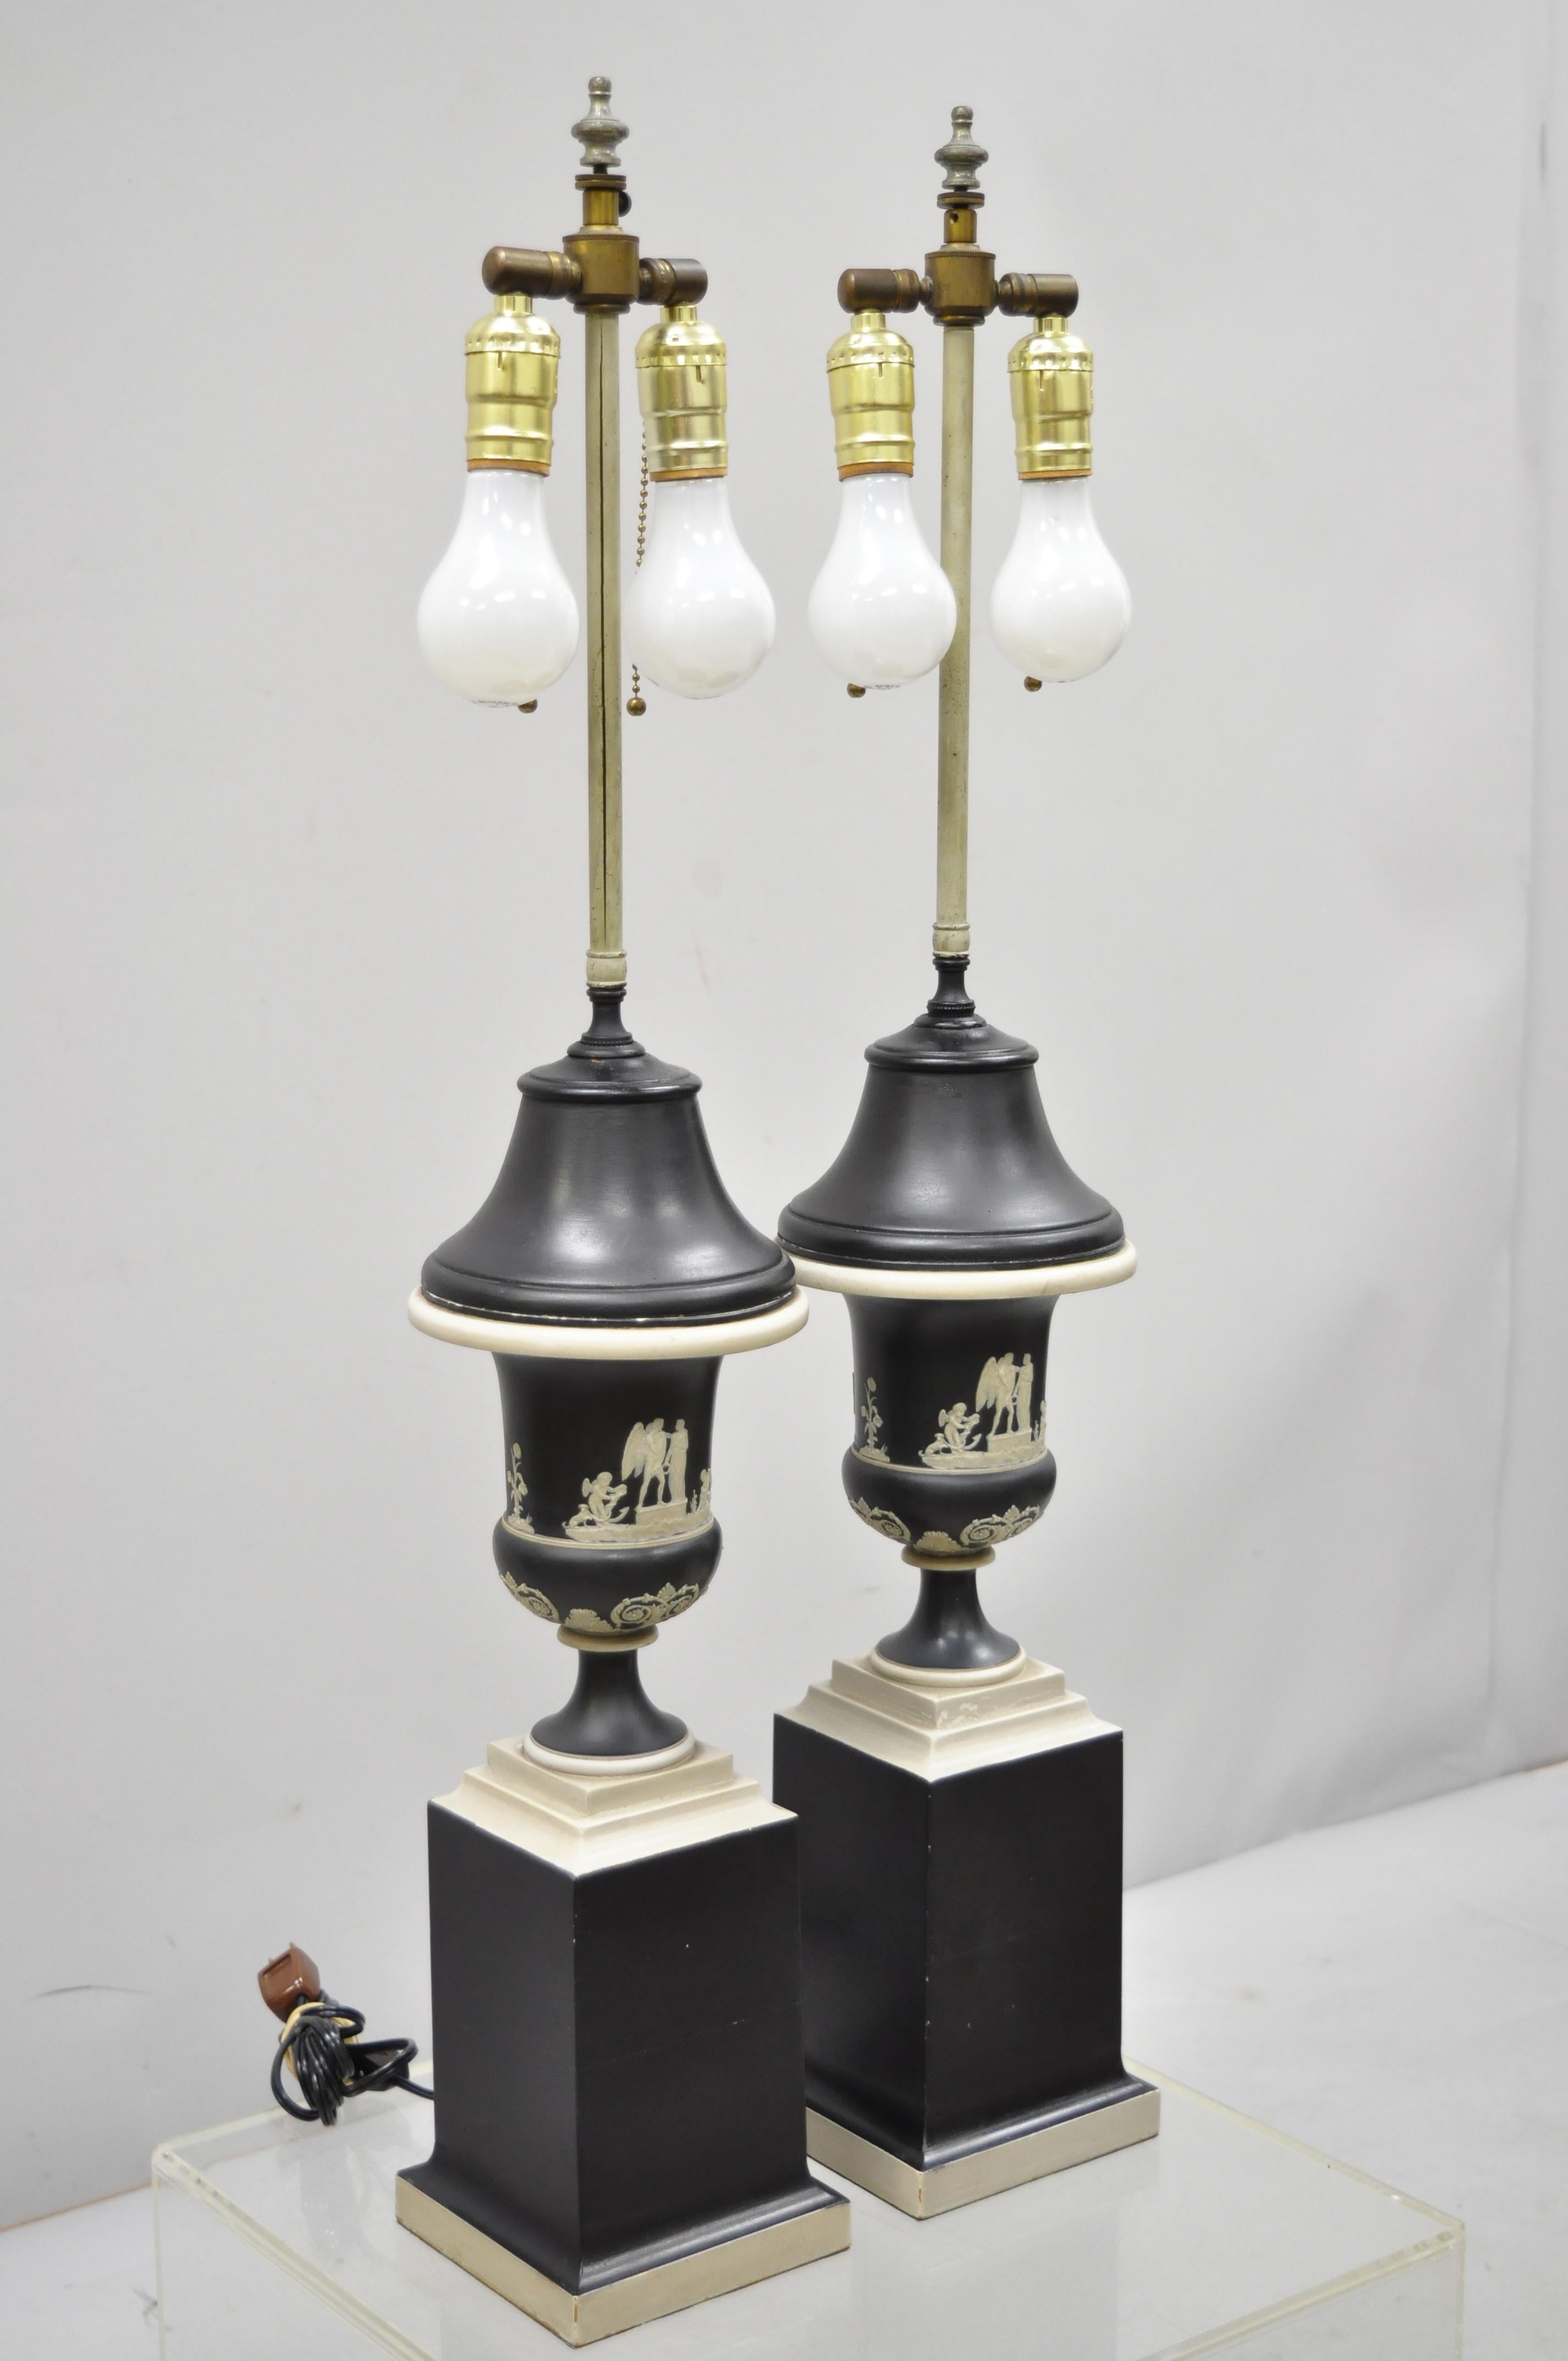 Pair of antique black and white Wedgwood jasperware urn table lamps. Listing includes porcelain urn form bodies, wooden base, dual sockets, white Greek figures, very nice antique item. Believed to be Wedgwood, circa early 20th century. Measurements: